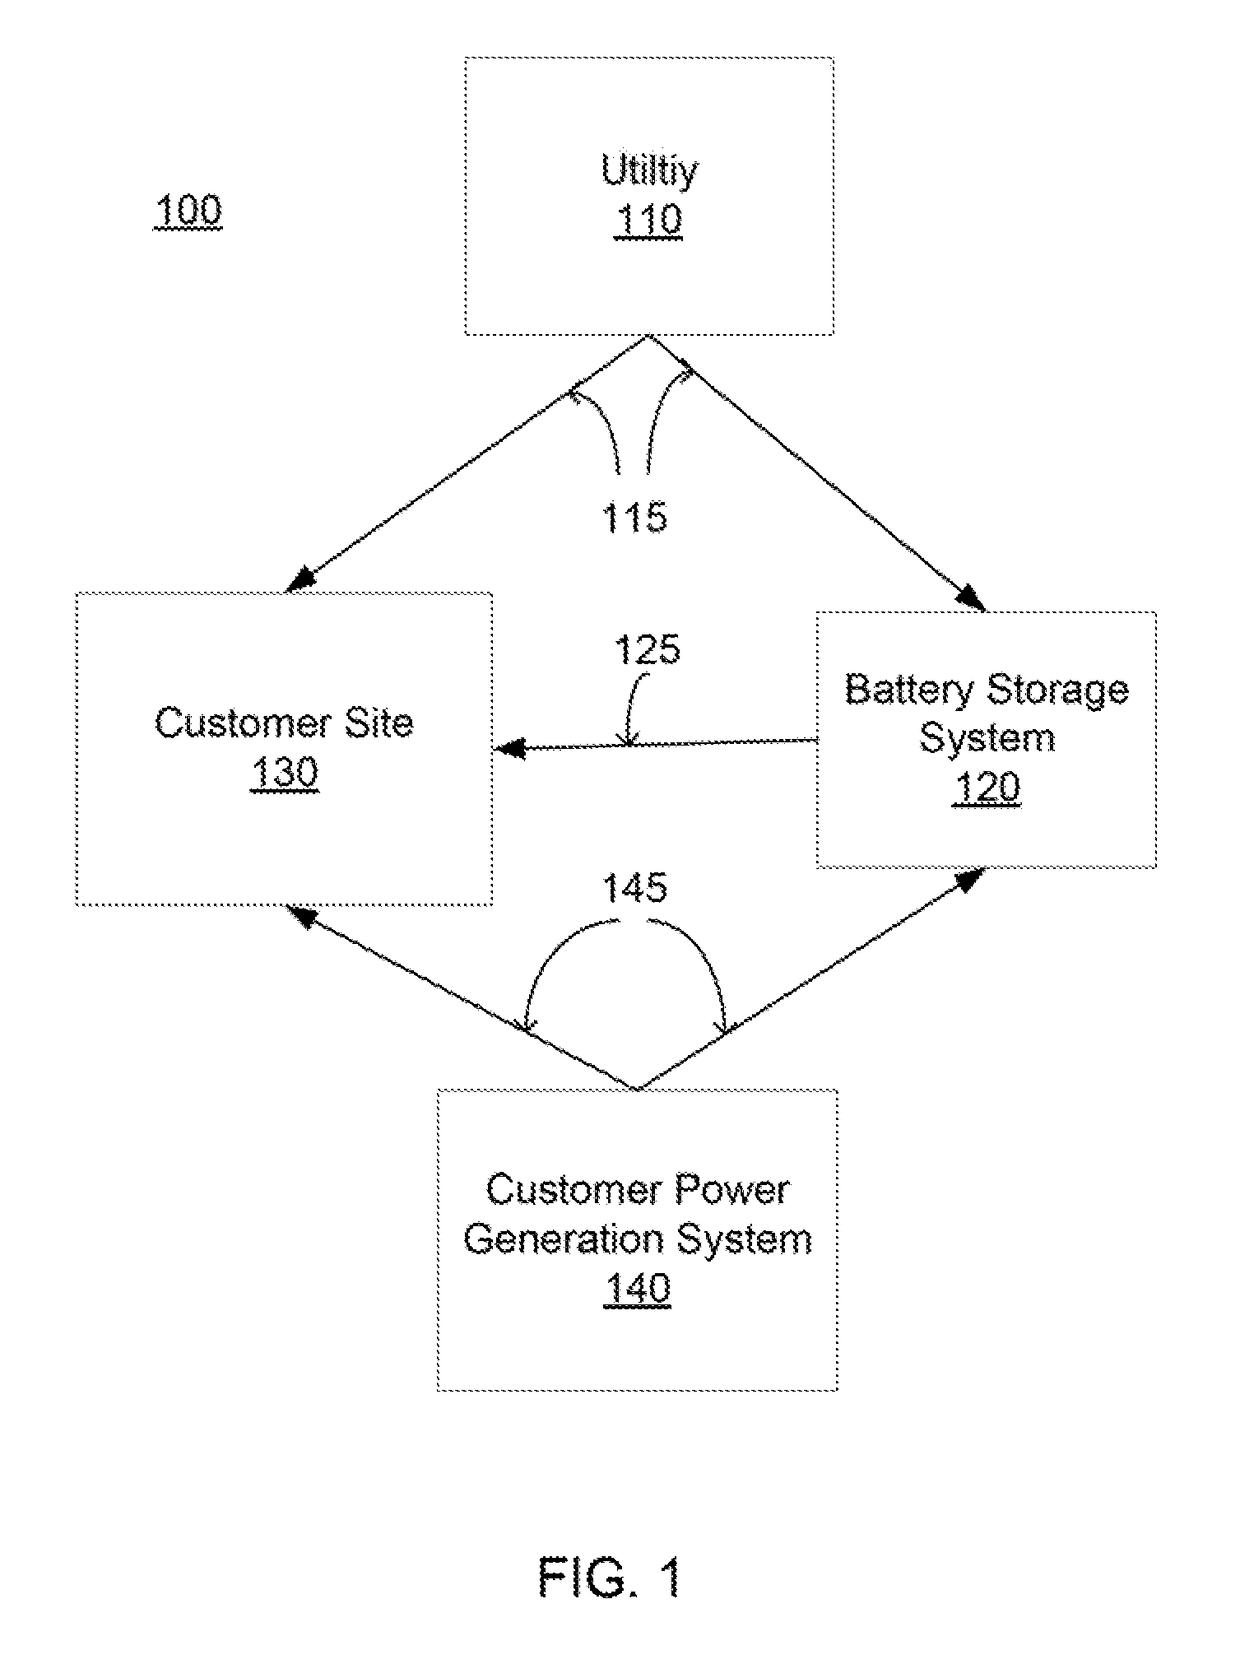 Optimal battery sizing for behind-the-meter applications considering participation in demand response programs and demand charge reduction